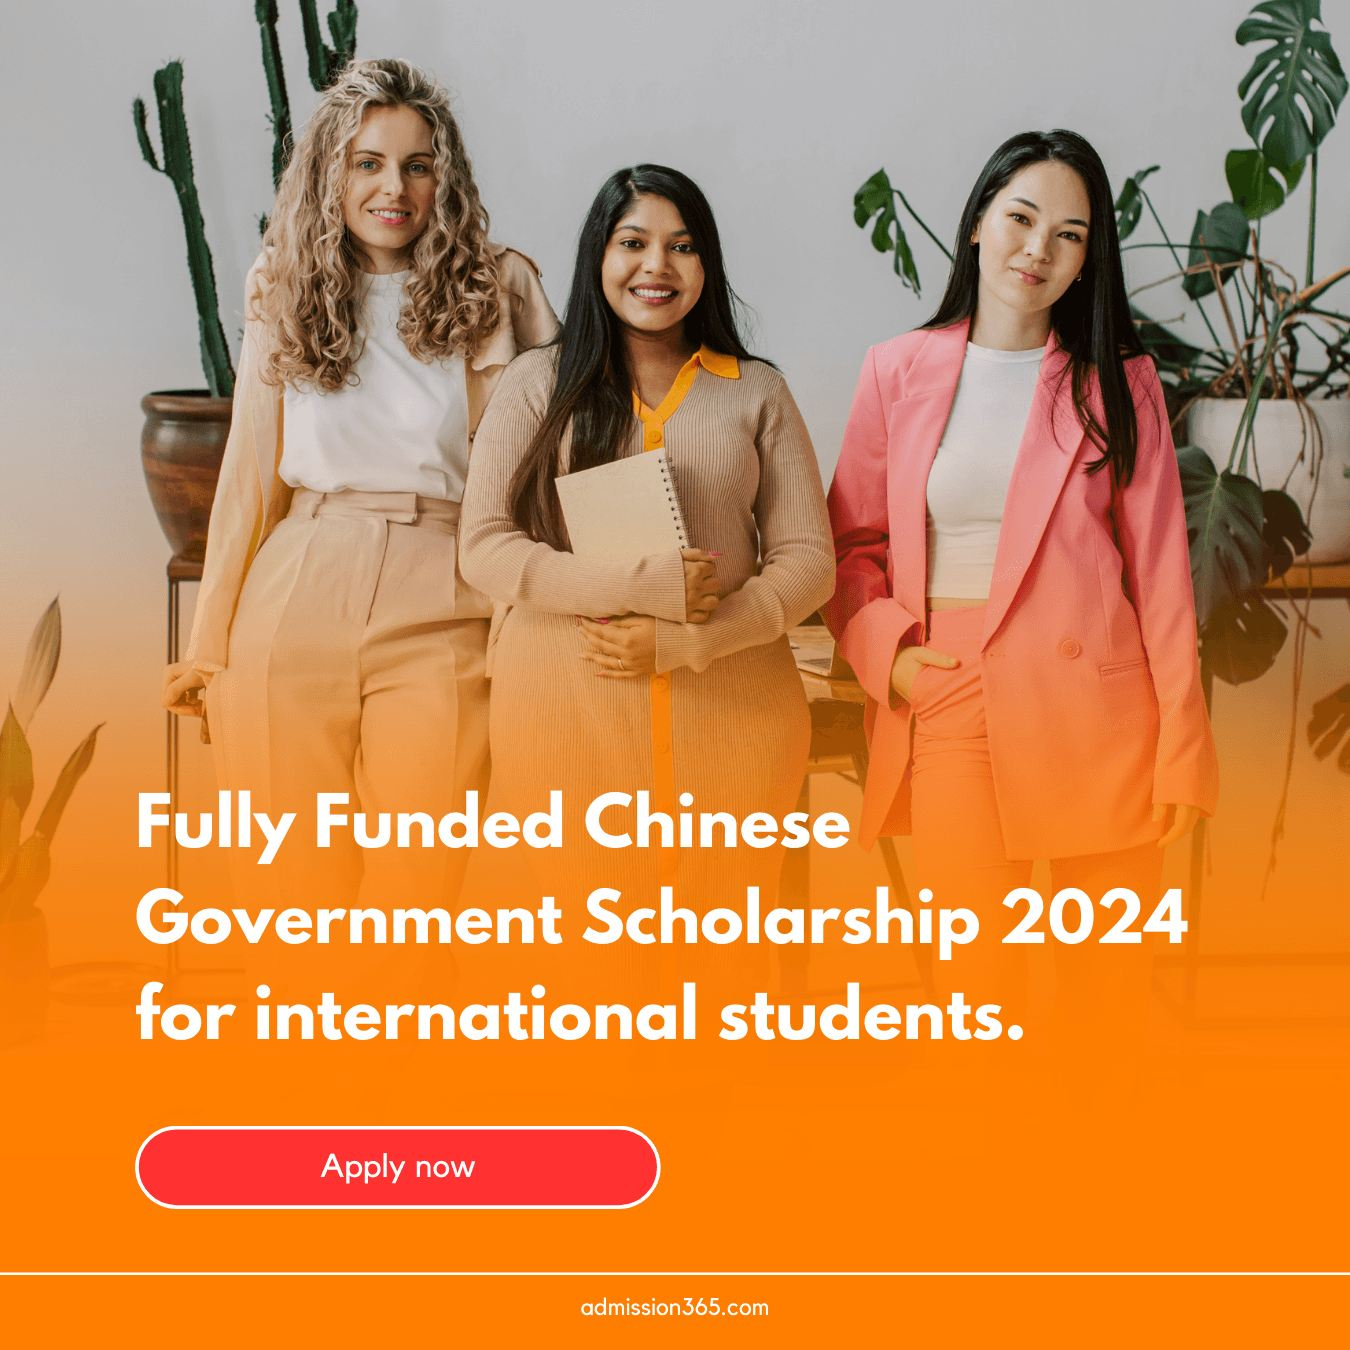 Study in China - Admission365